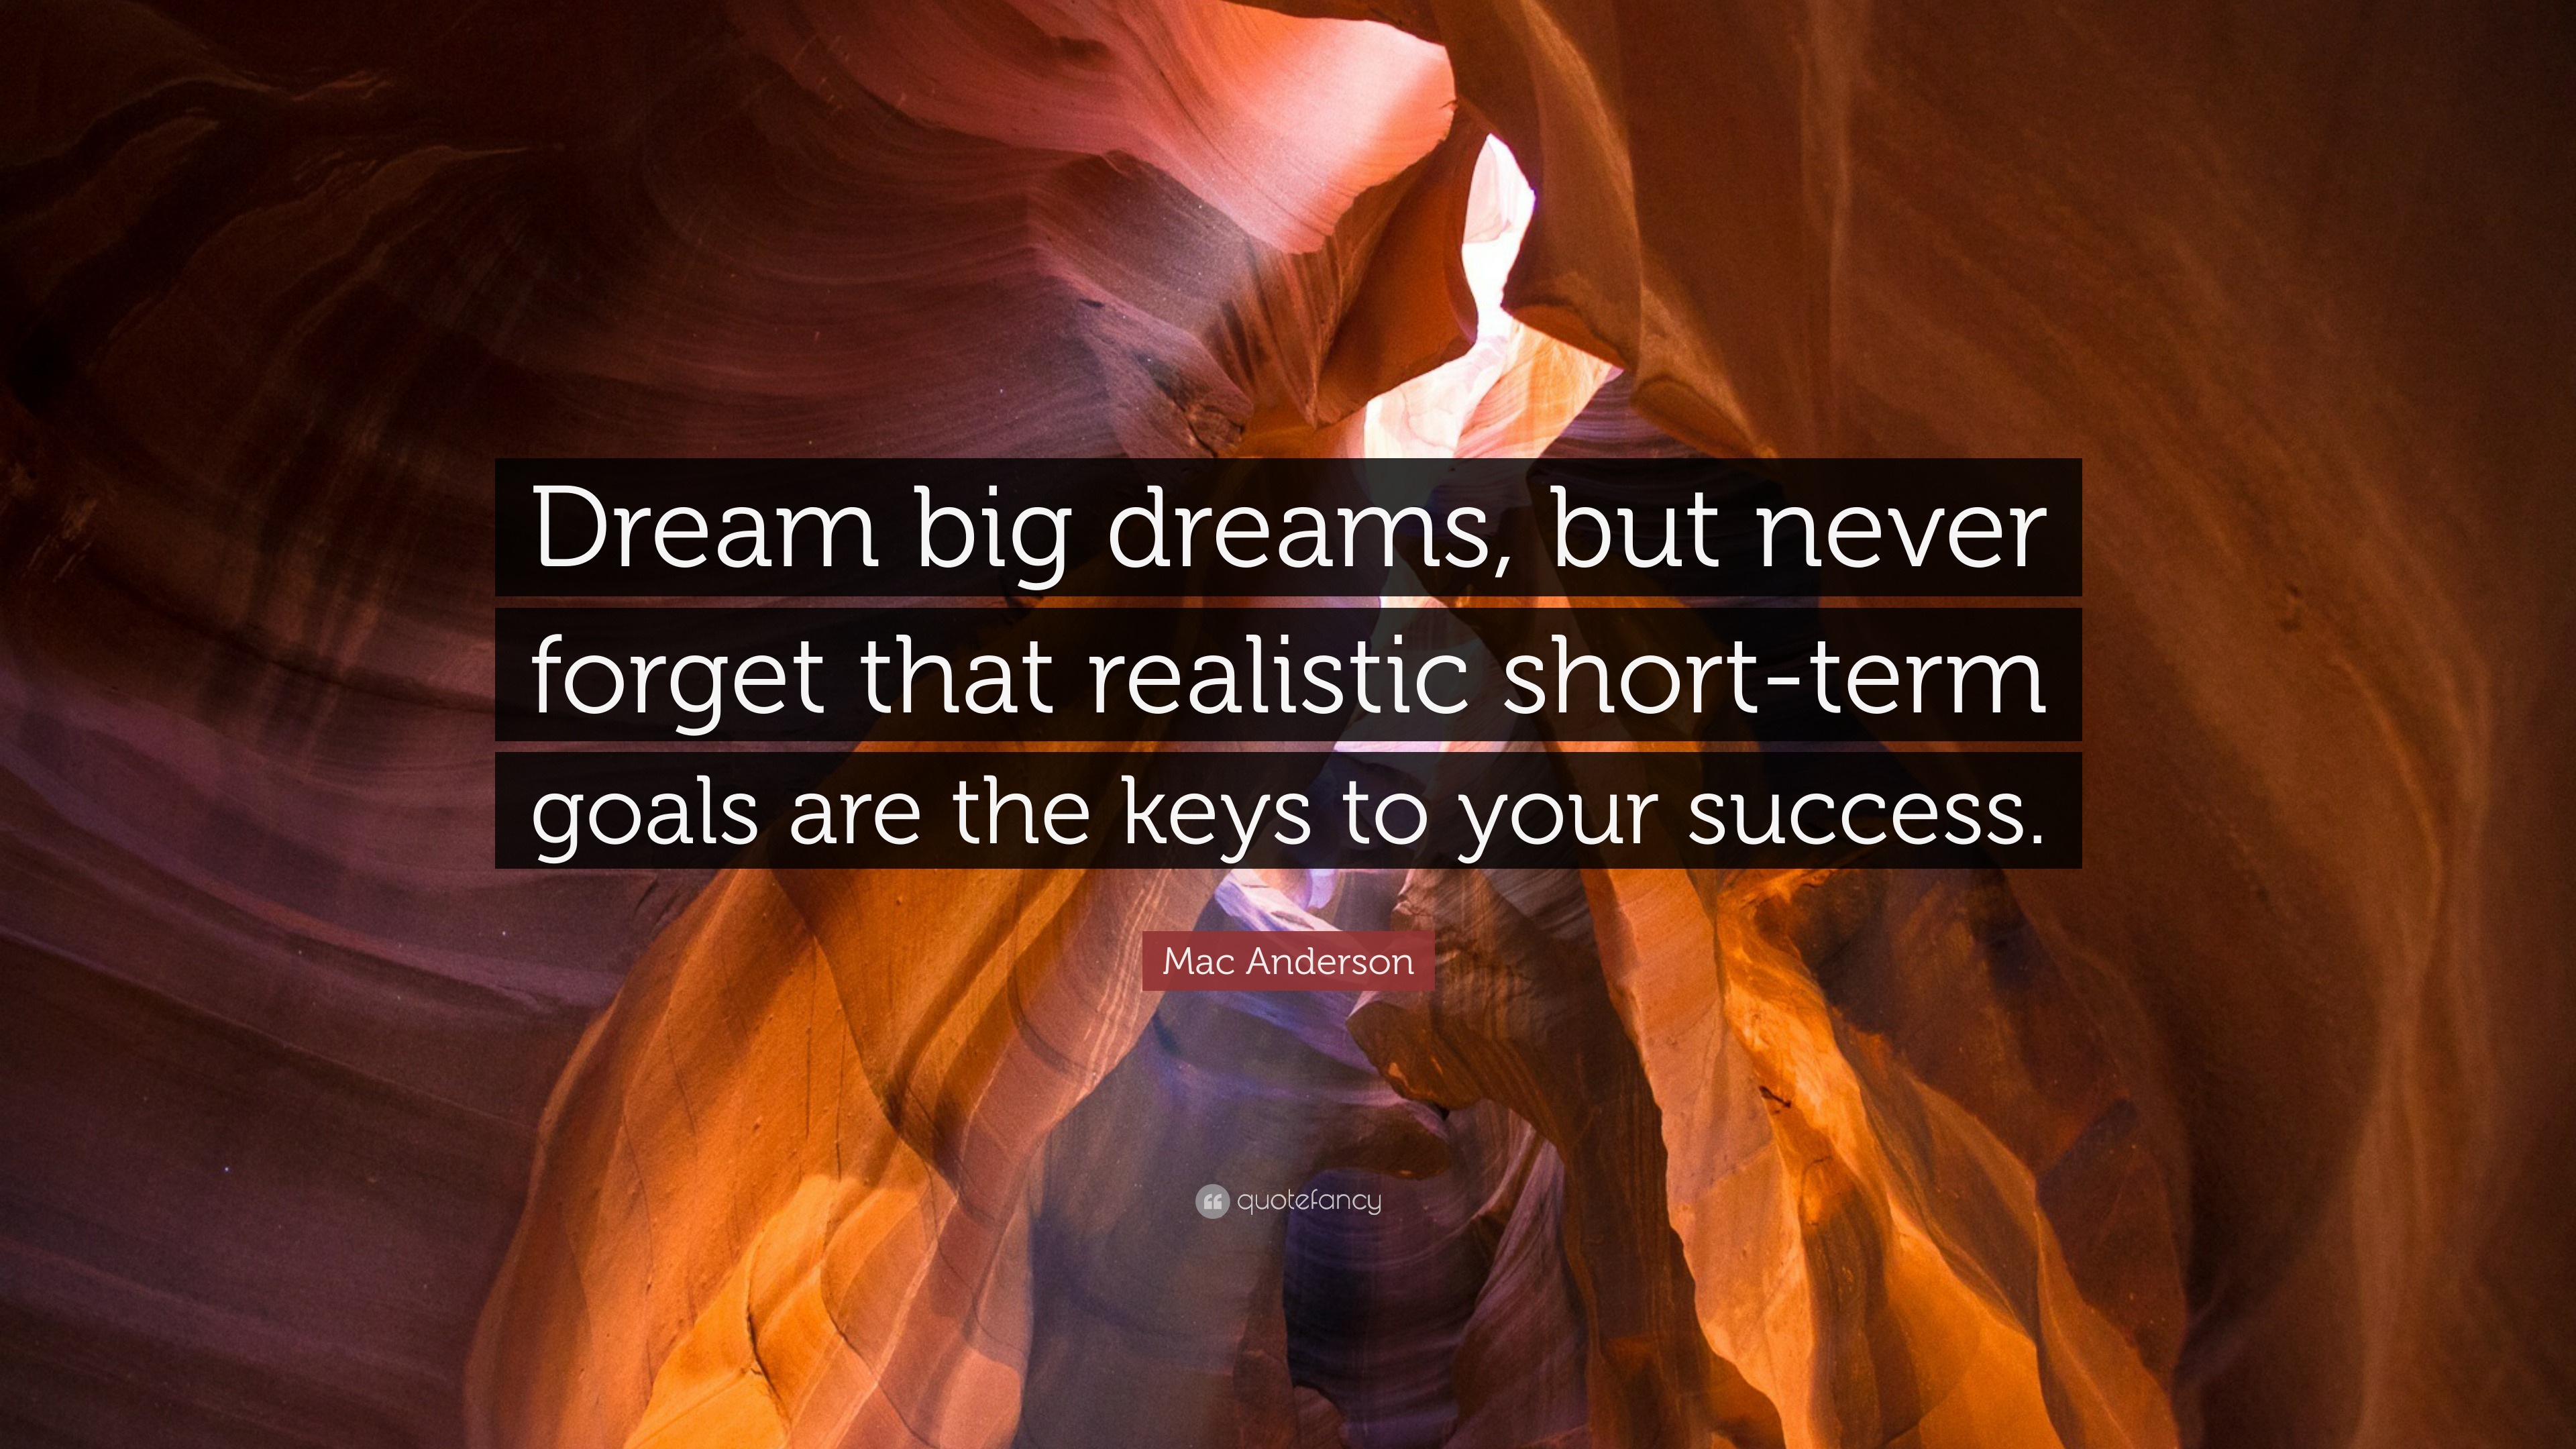 Mac Anderson Quote: “Dream big dreams, but never forget that